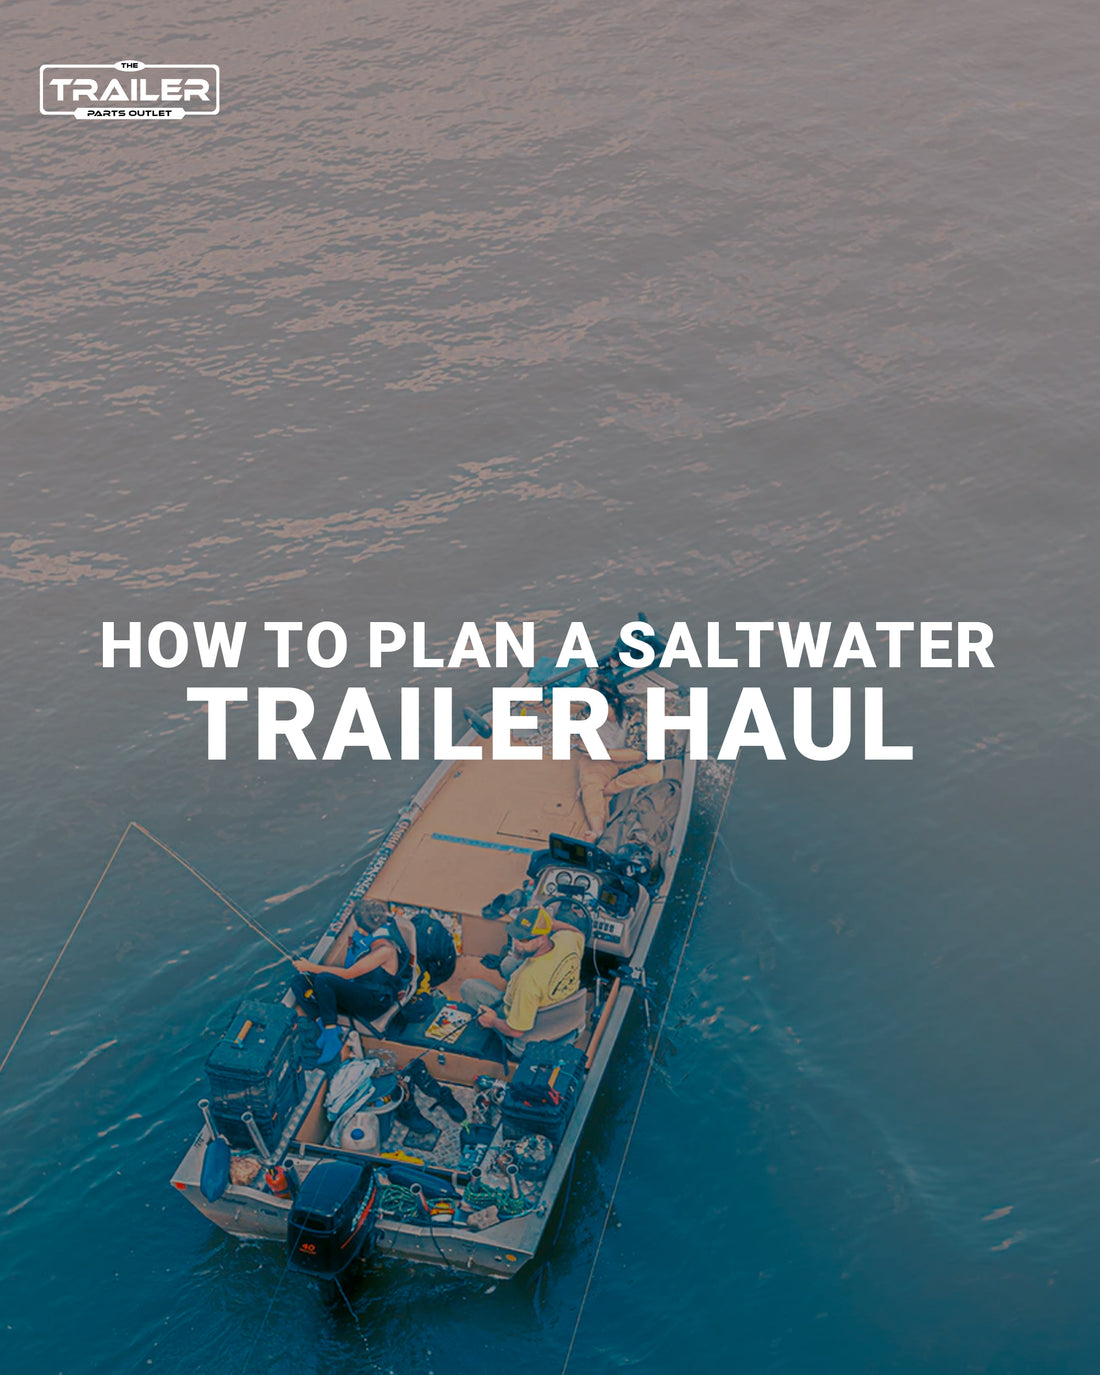 How to Plan a Saltwater Trailer Haul